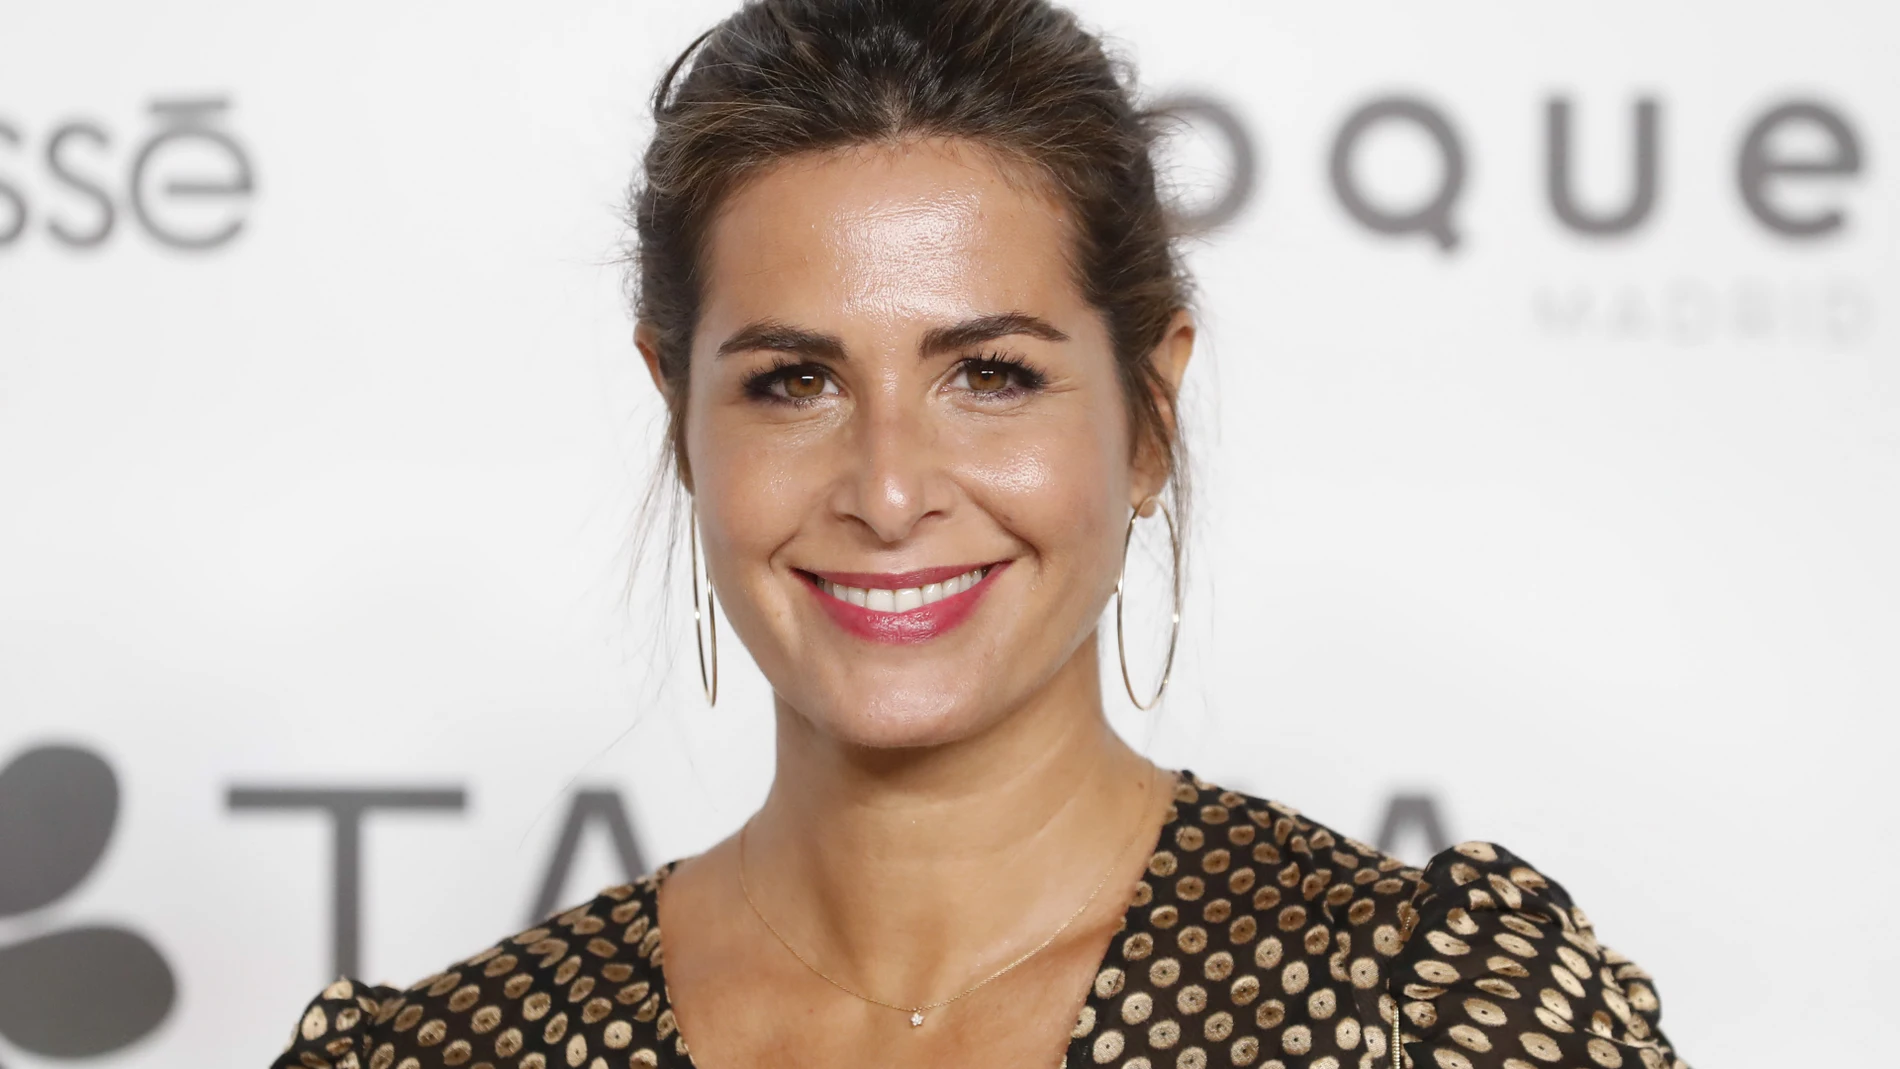 Presenter Nuria Roca at photocall for 25 anniversary of " Tacha Beuty " in Madrid on Thursday, 10 October 2019.